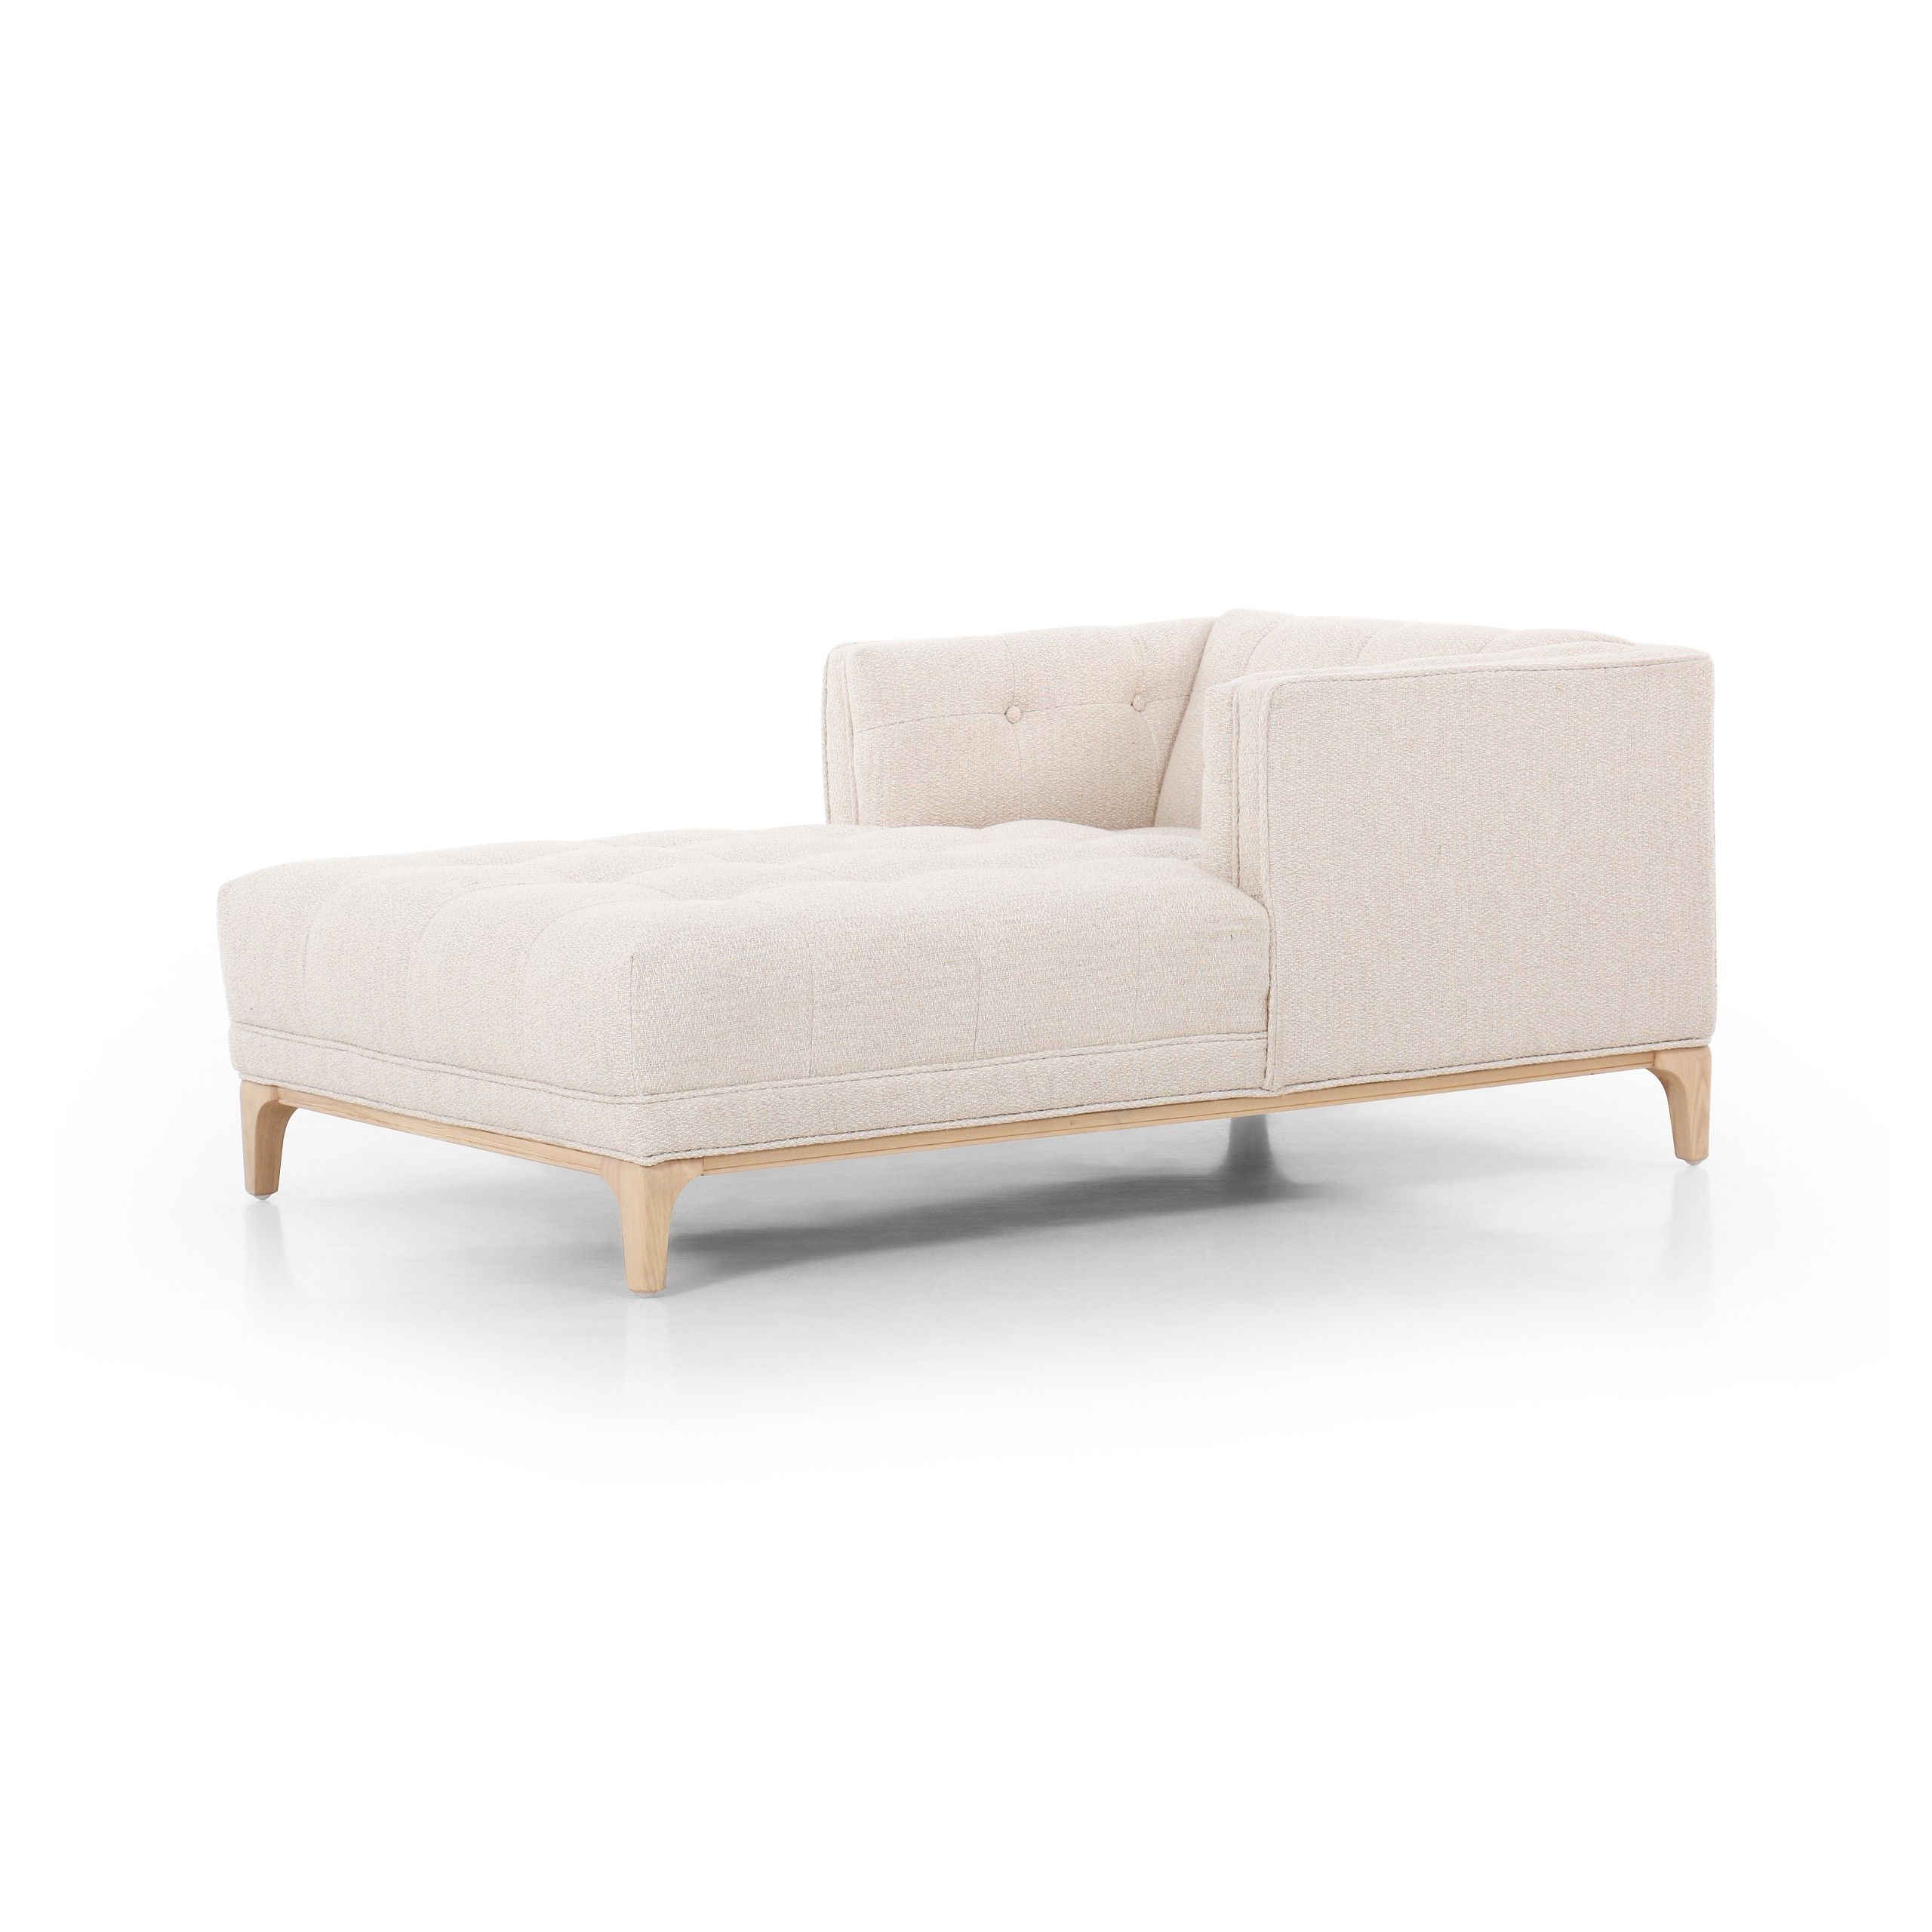 Dylan Chaise Lounge - Kerbey Taupe side